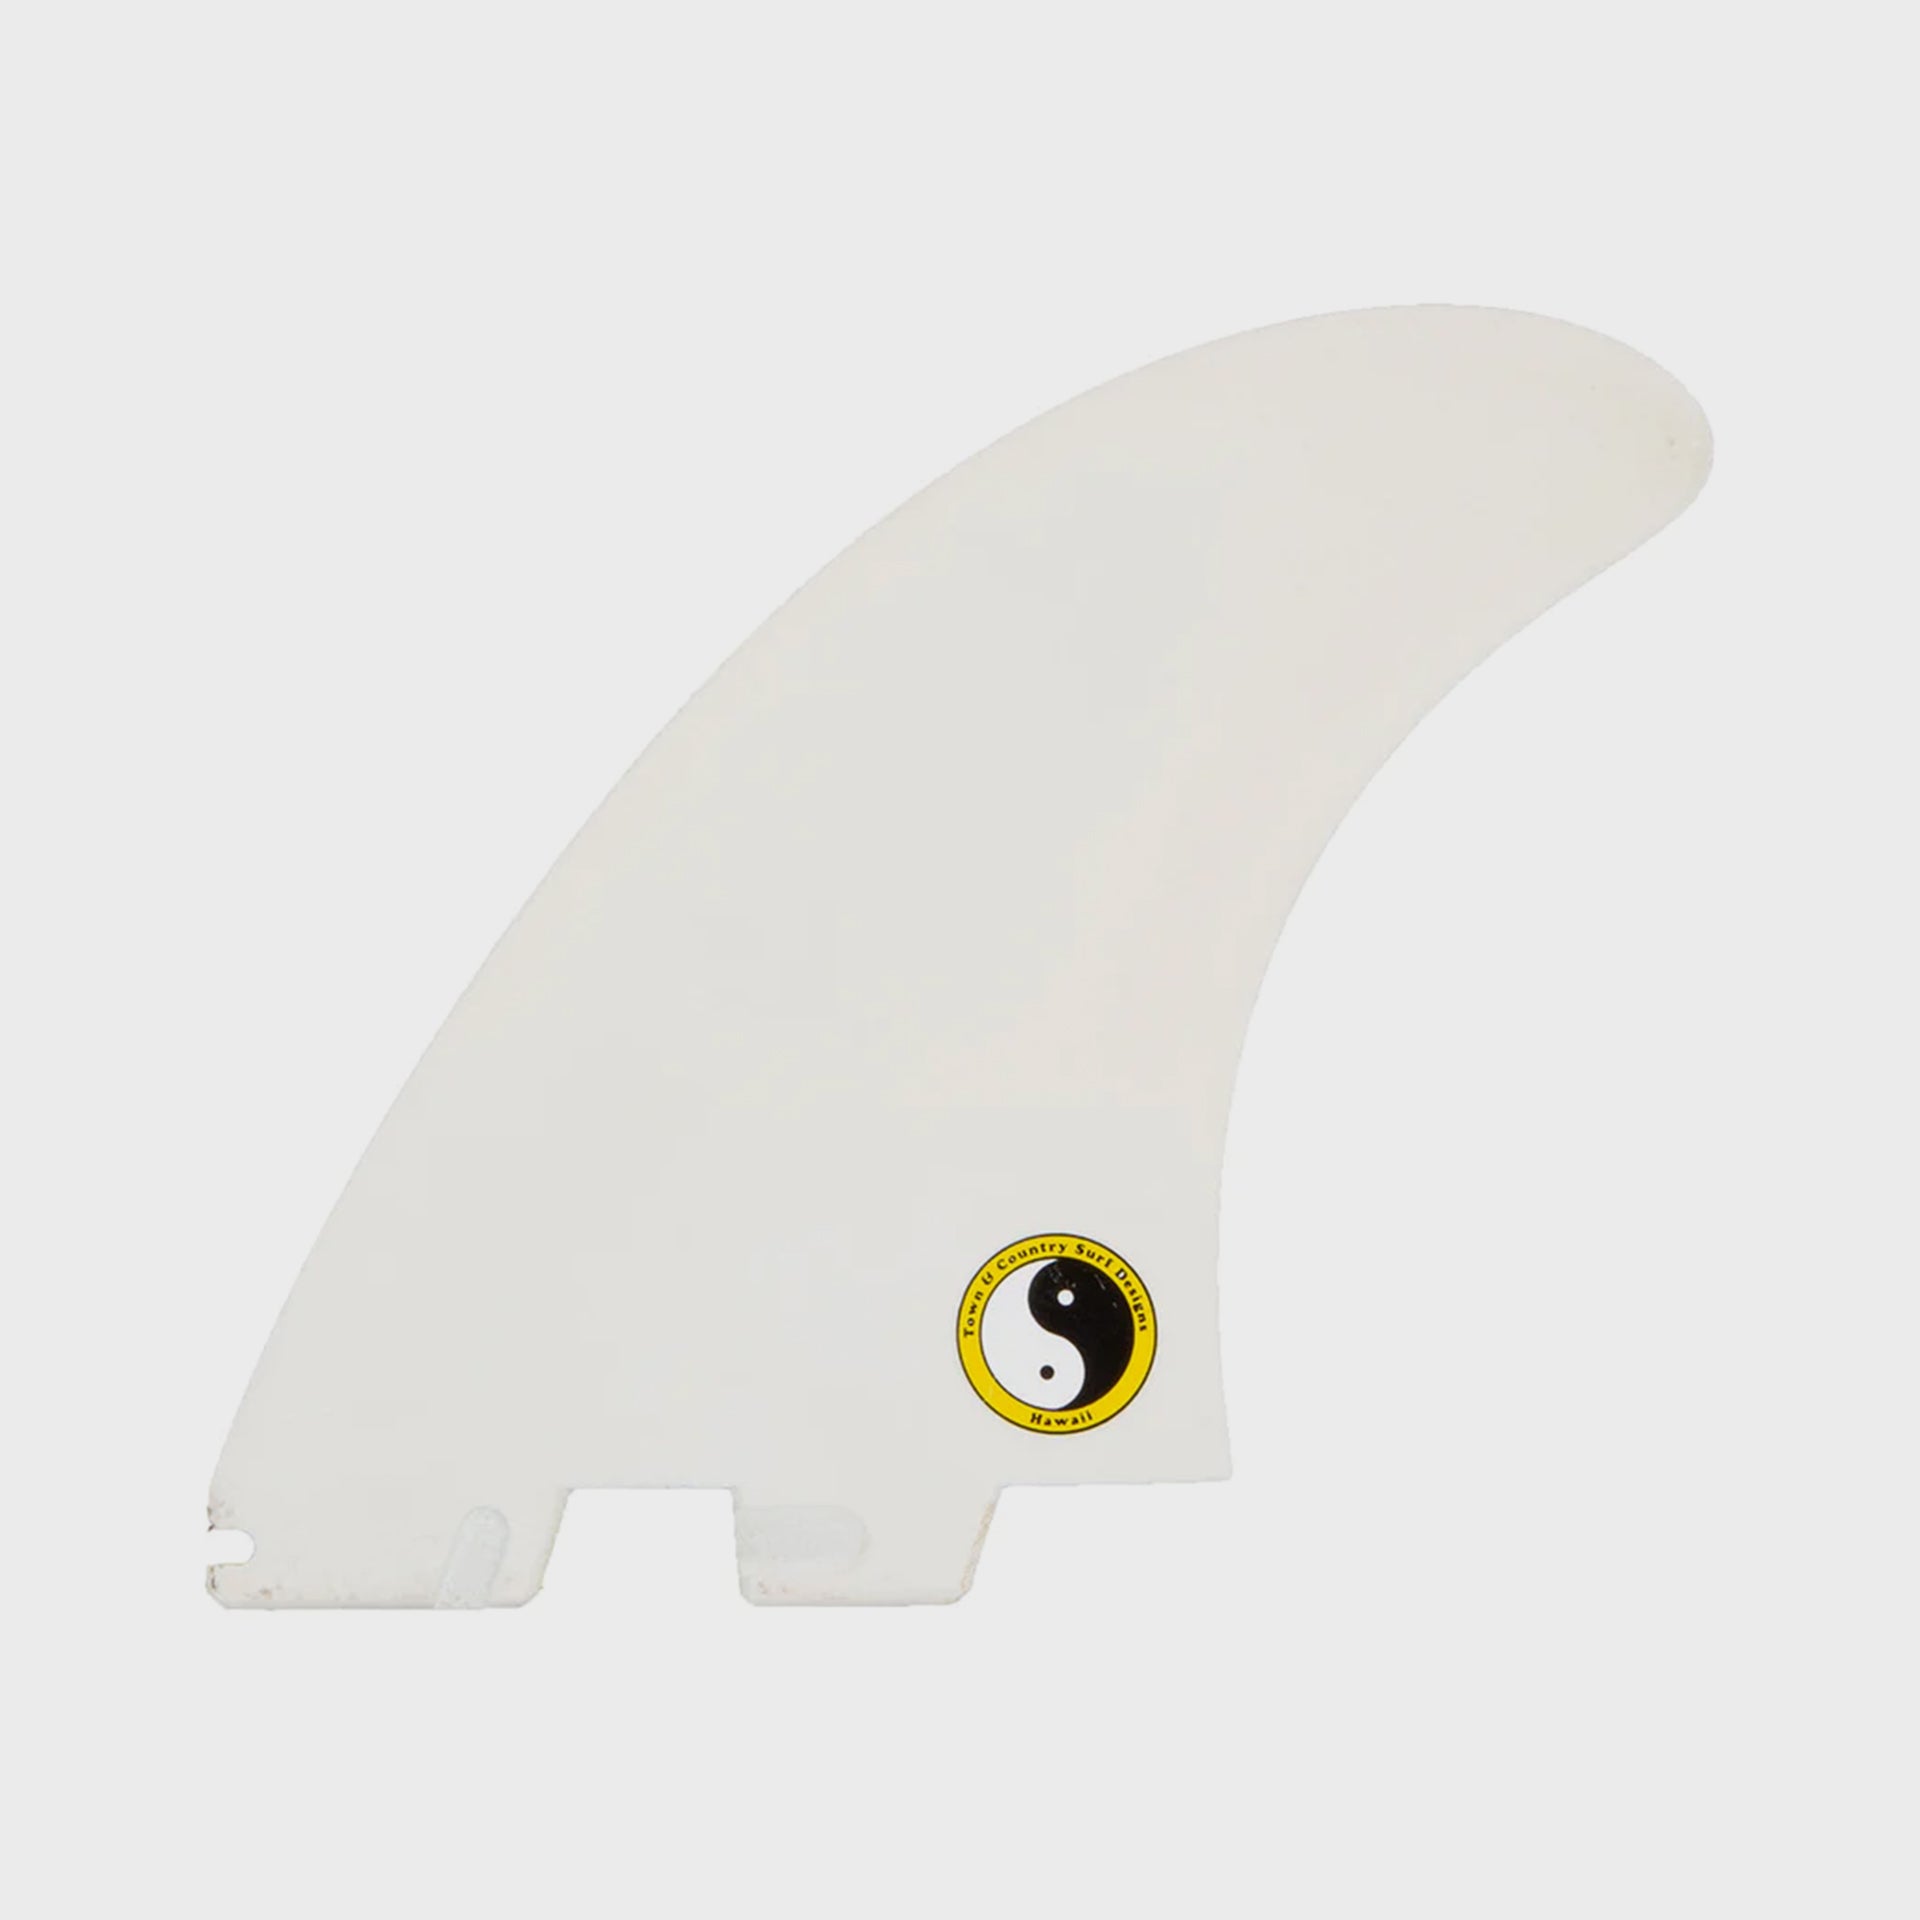 FCS Town and Country FCS II Twin+ Stabiliser Fin - Yellow Fade - ManGo Surfing